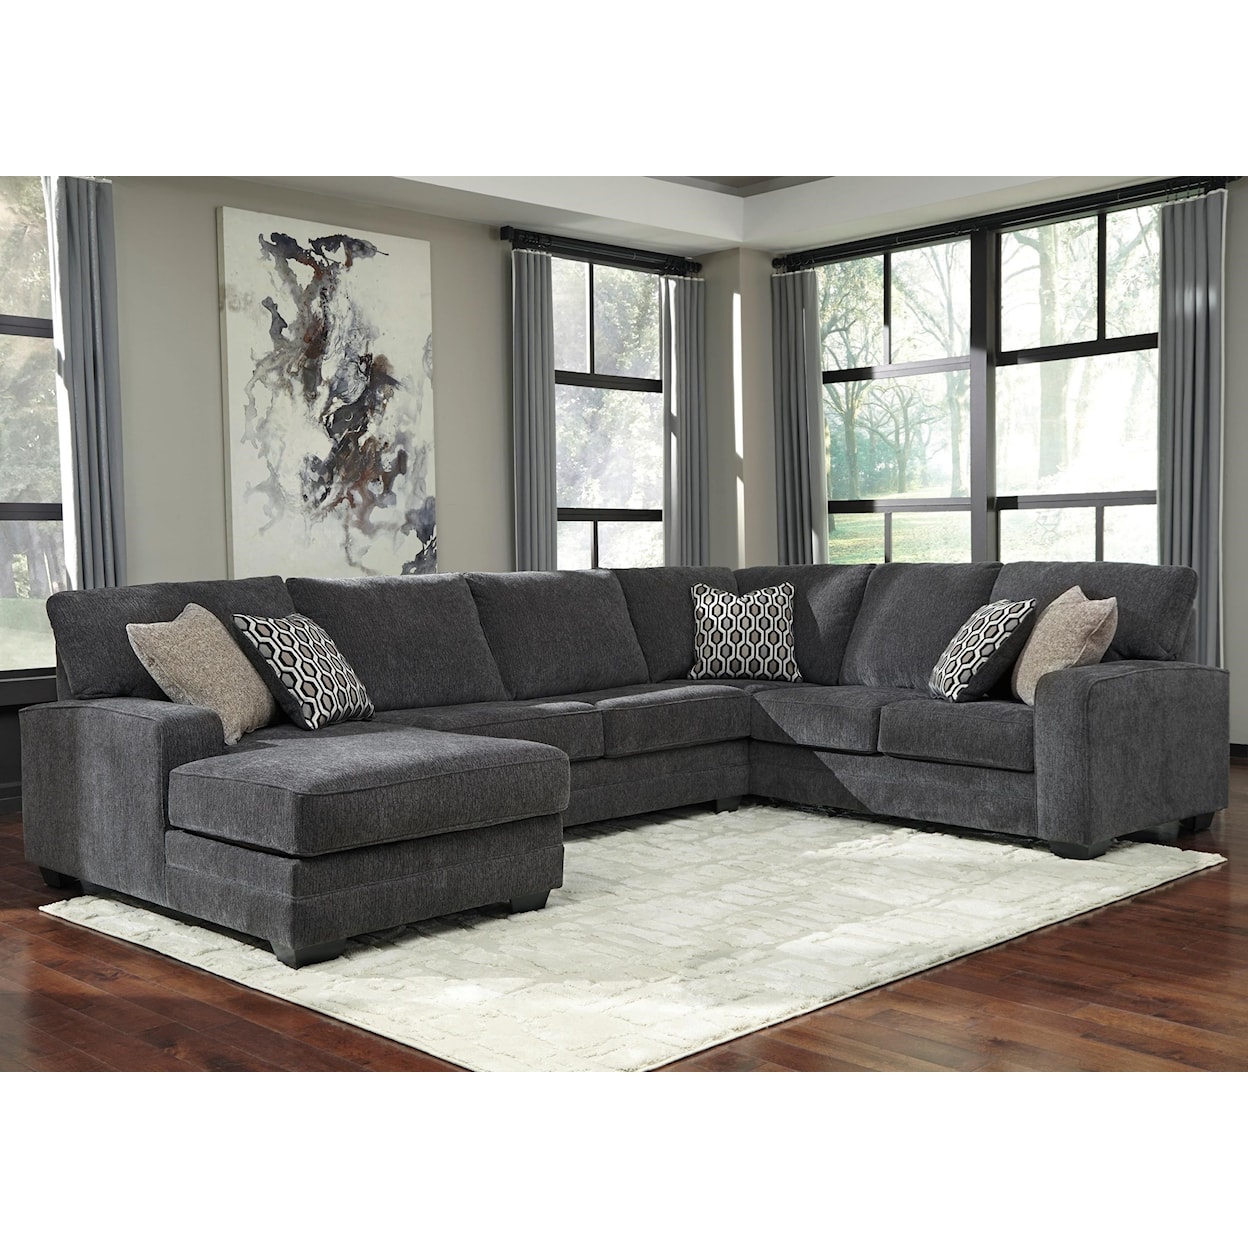 Benchcraft by Ashley Tracling Sectional with Left Chaise